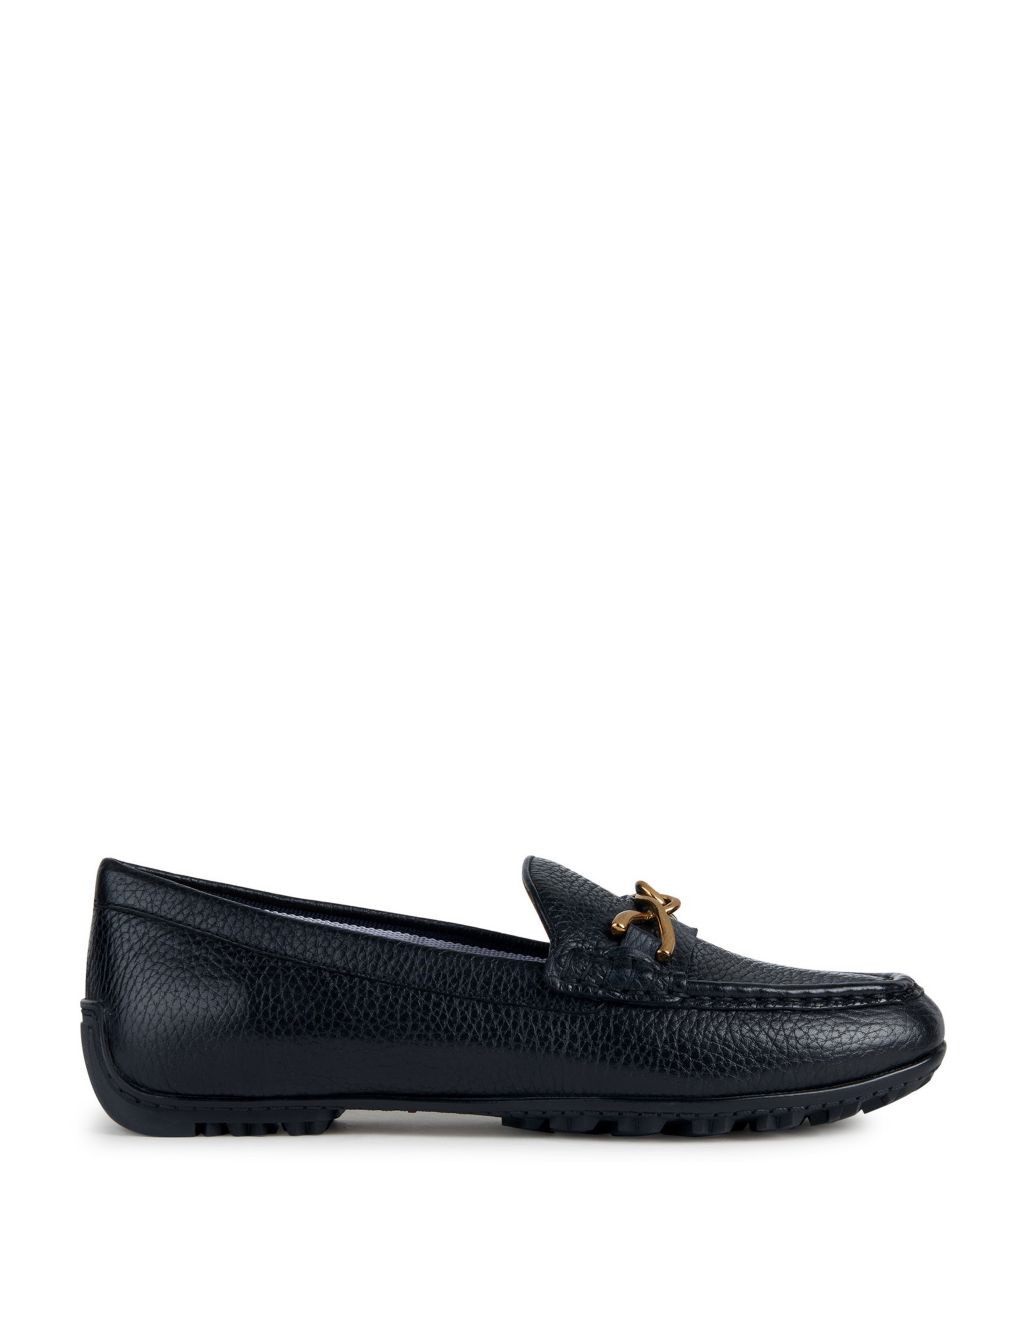 Leather Bar Slip On Flat Loafers 3 of 6